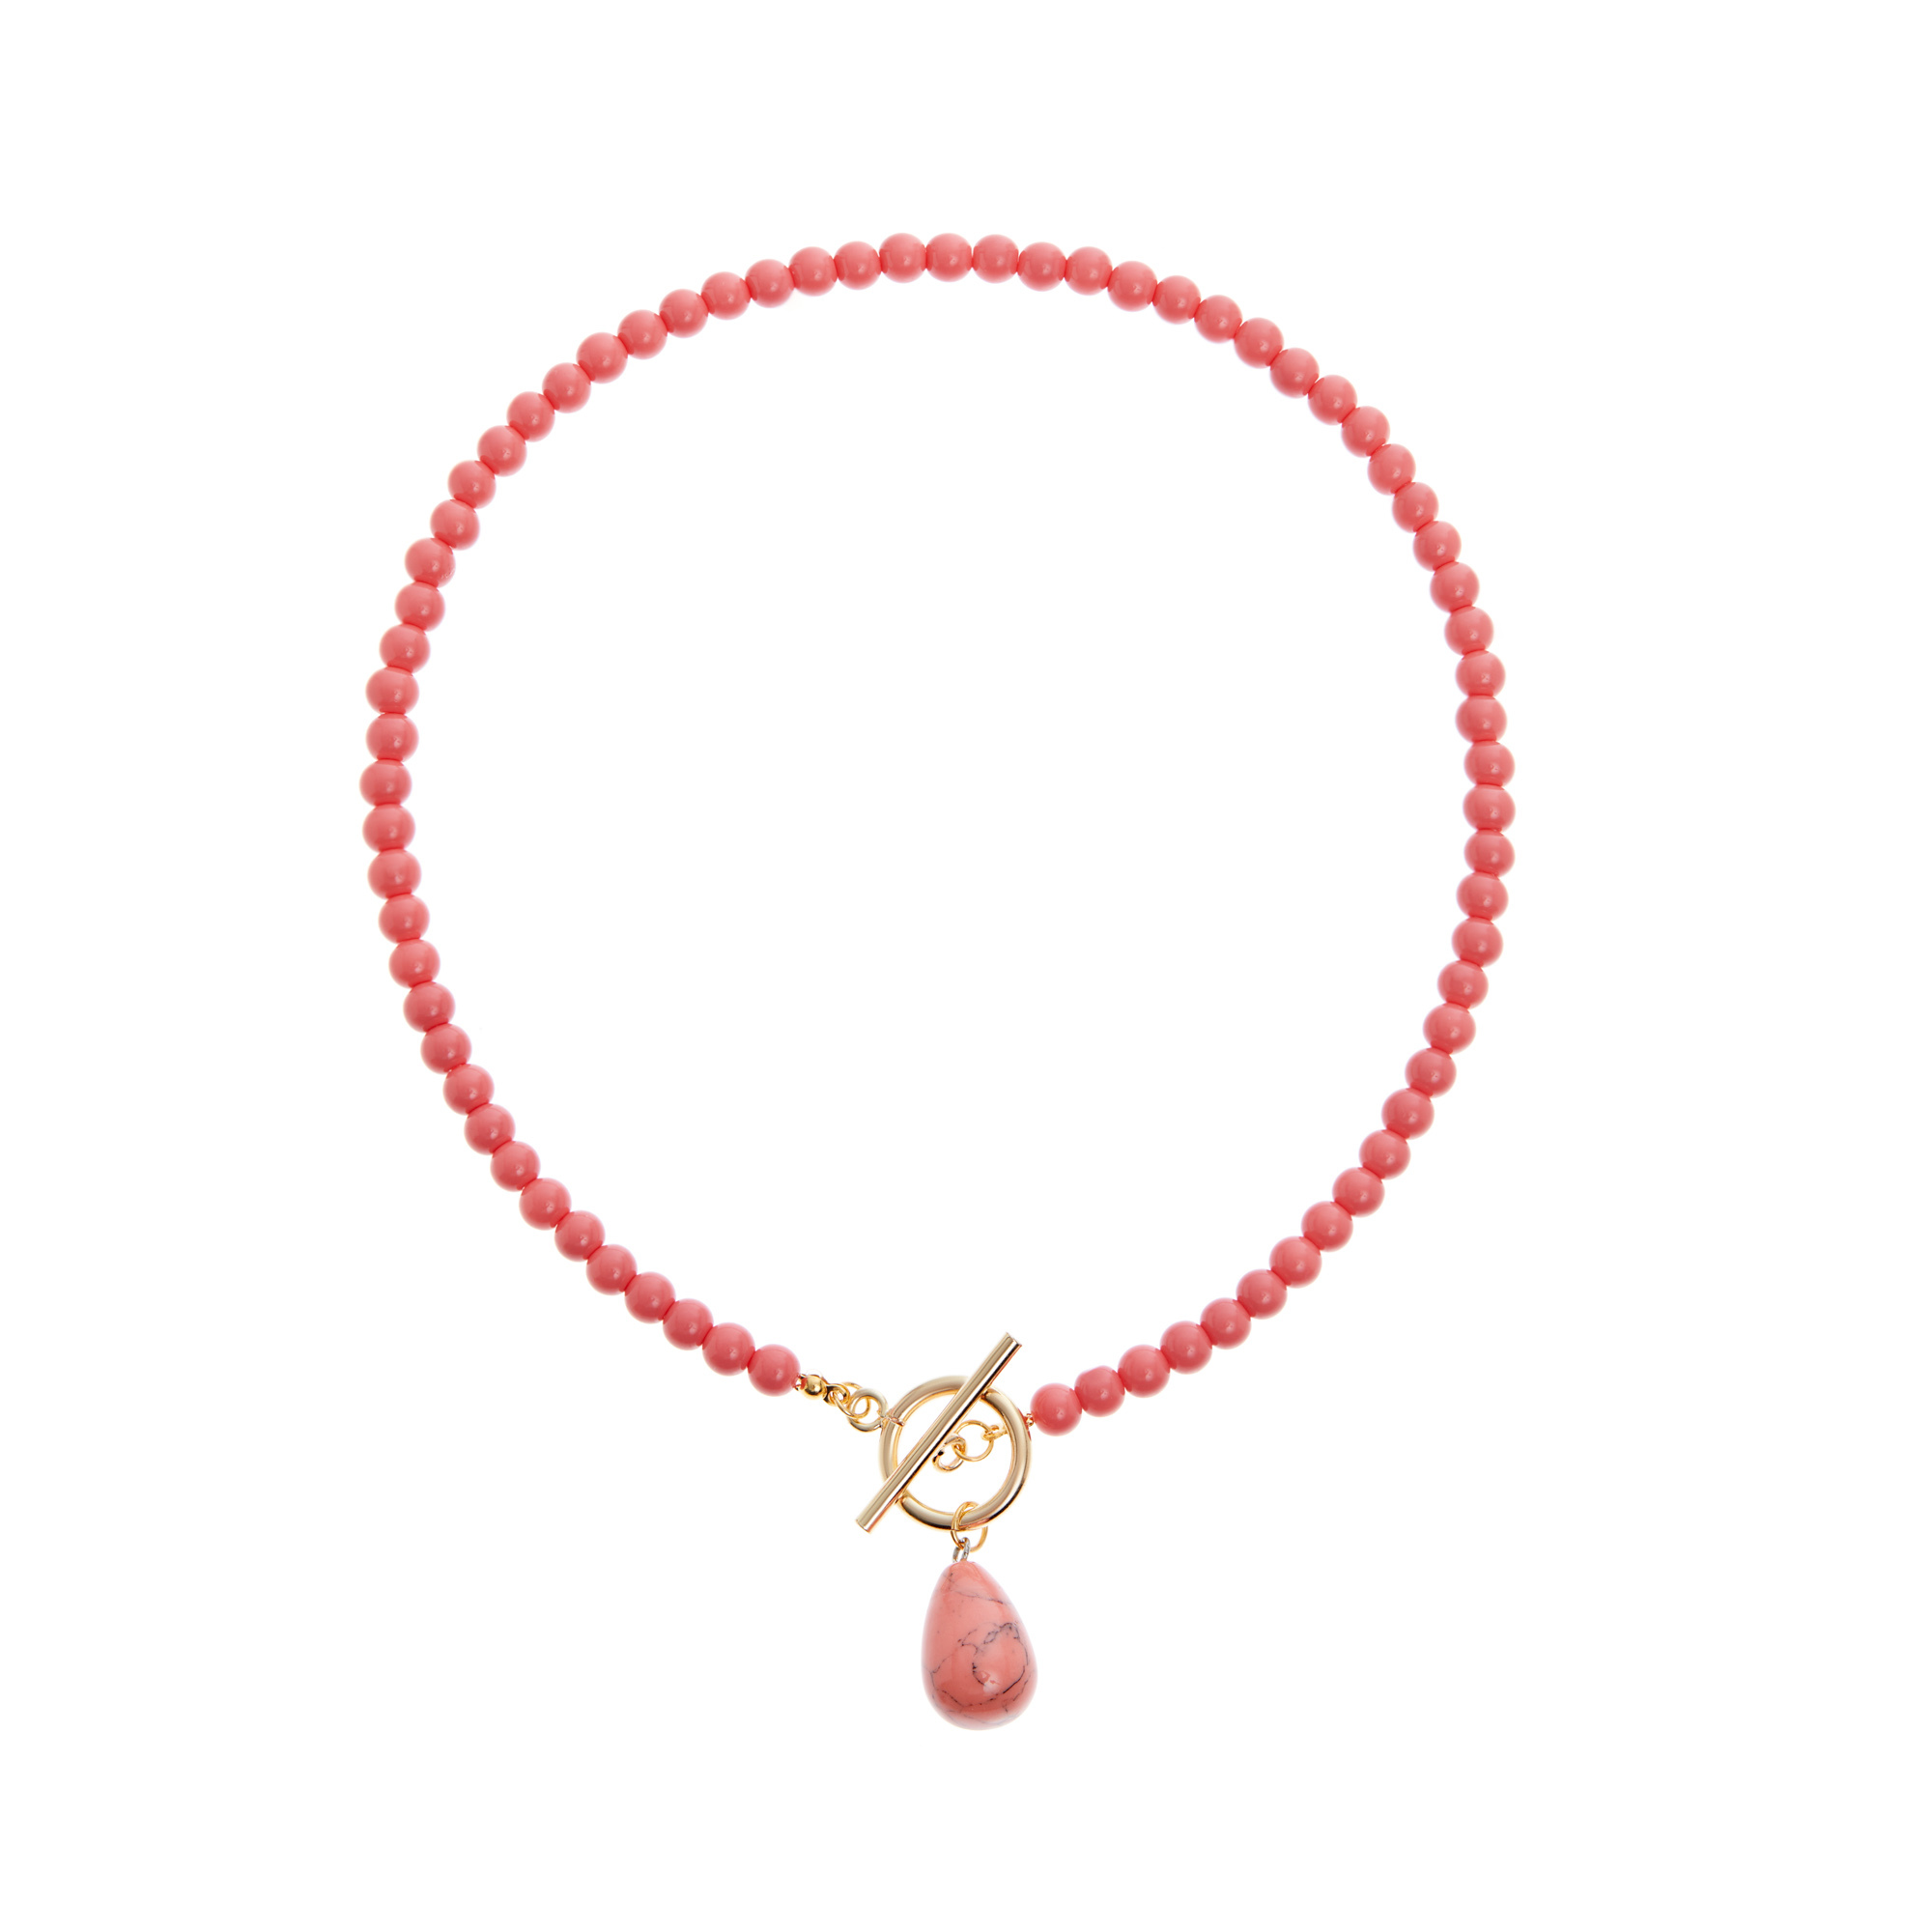 HOLLY JUNE Колье Drop Necklace – Coral holly june колье plumberry necklace